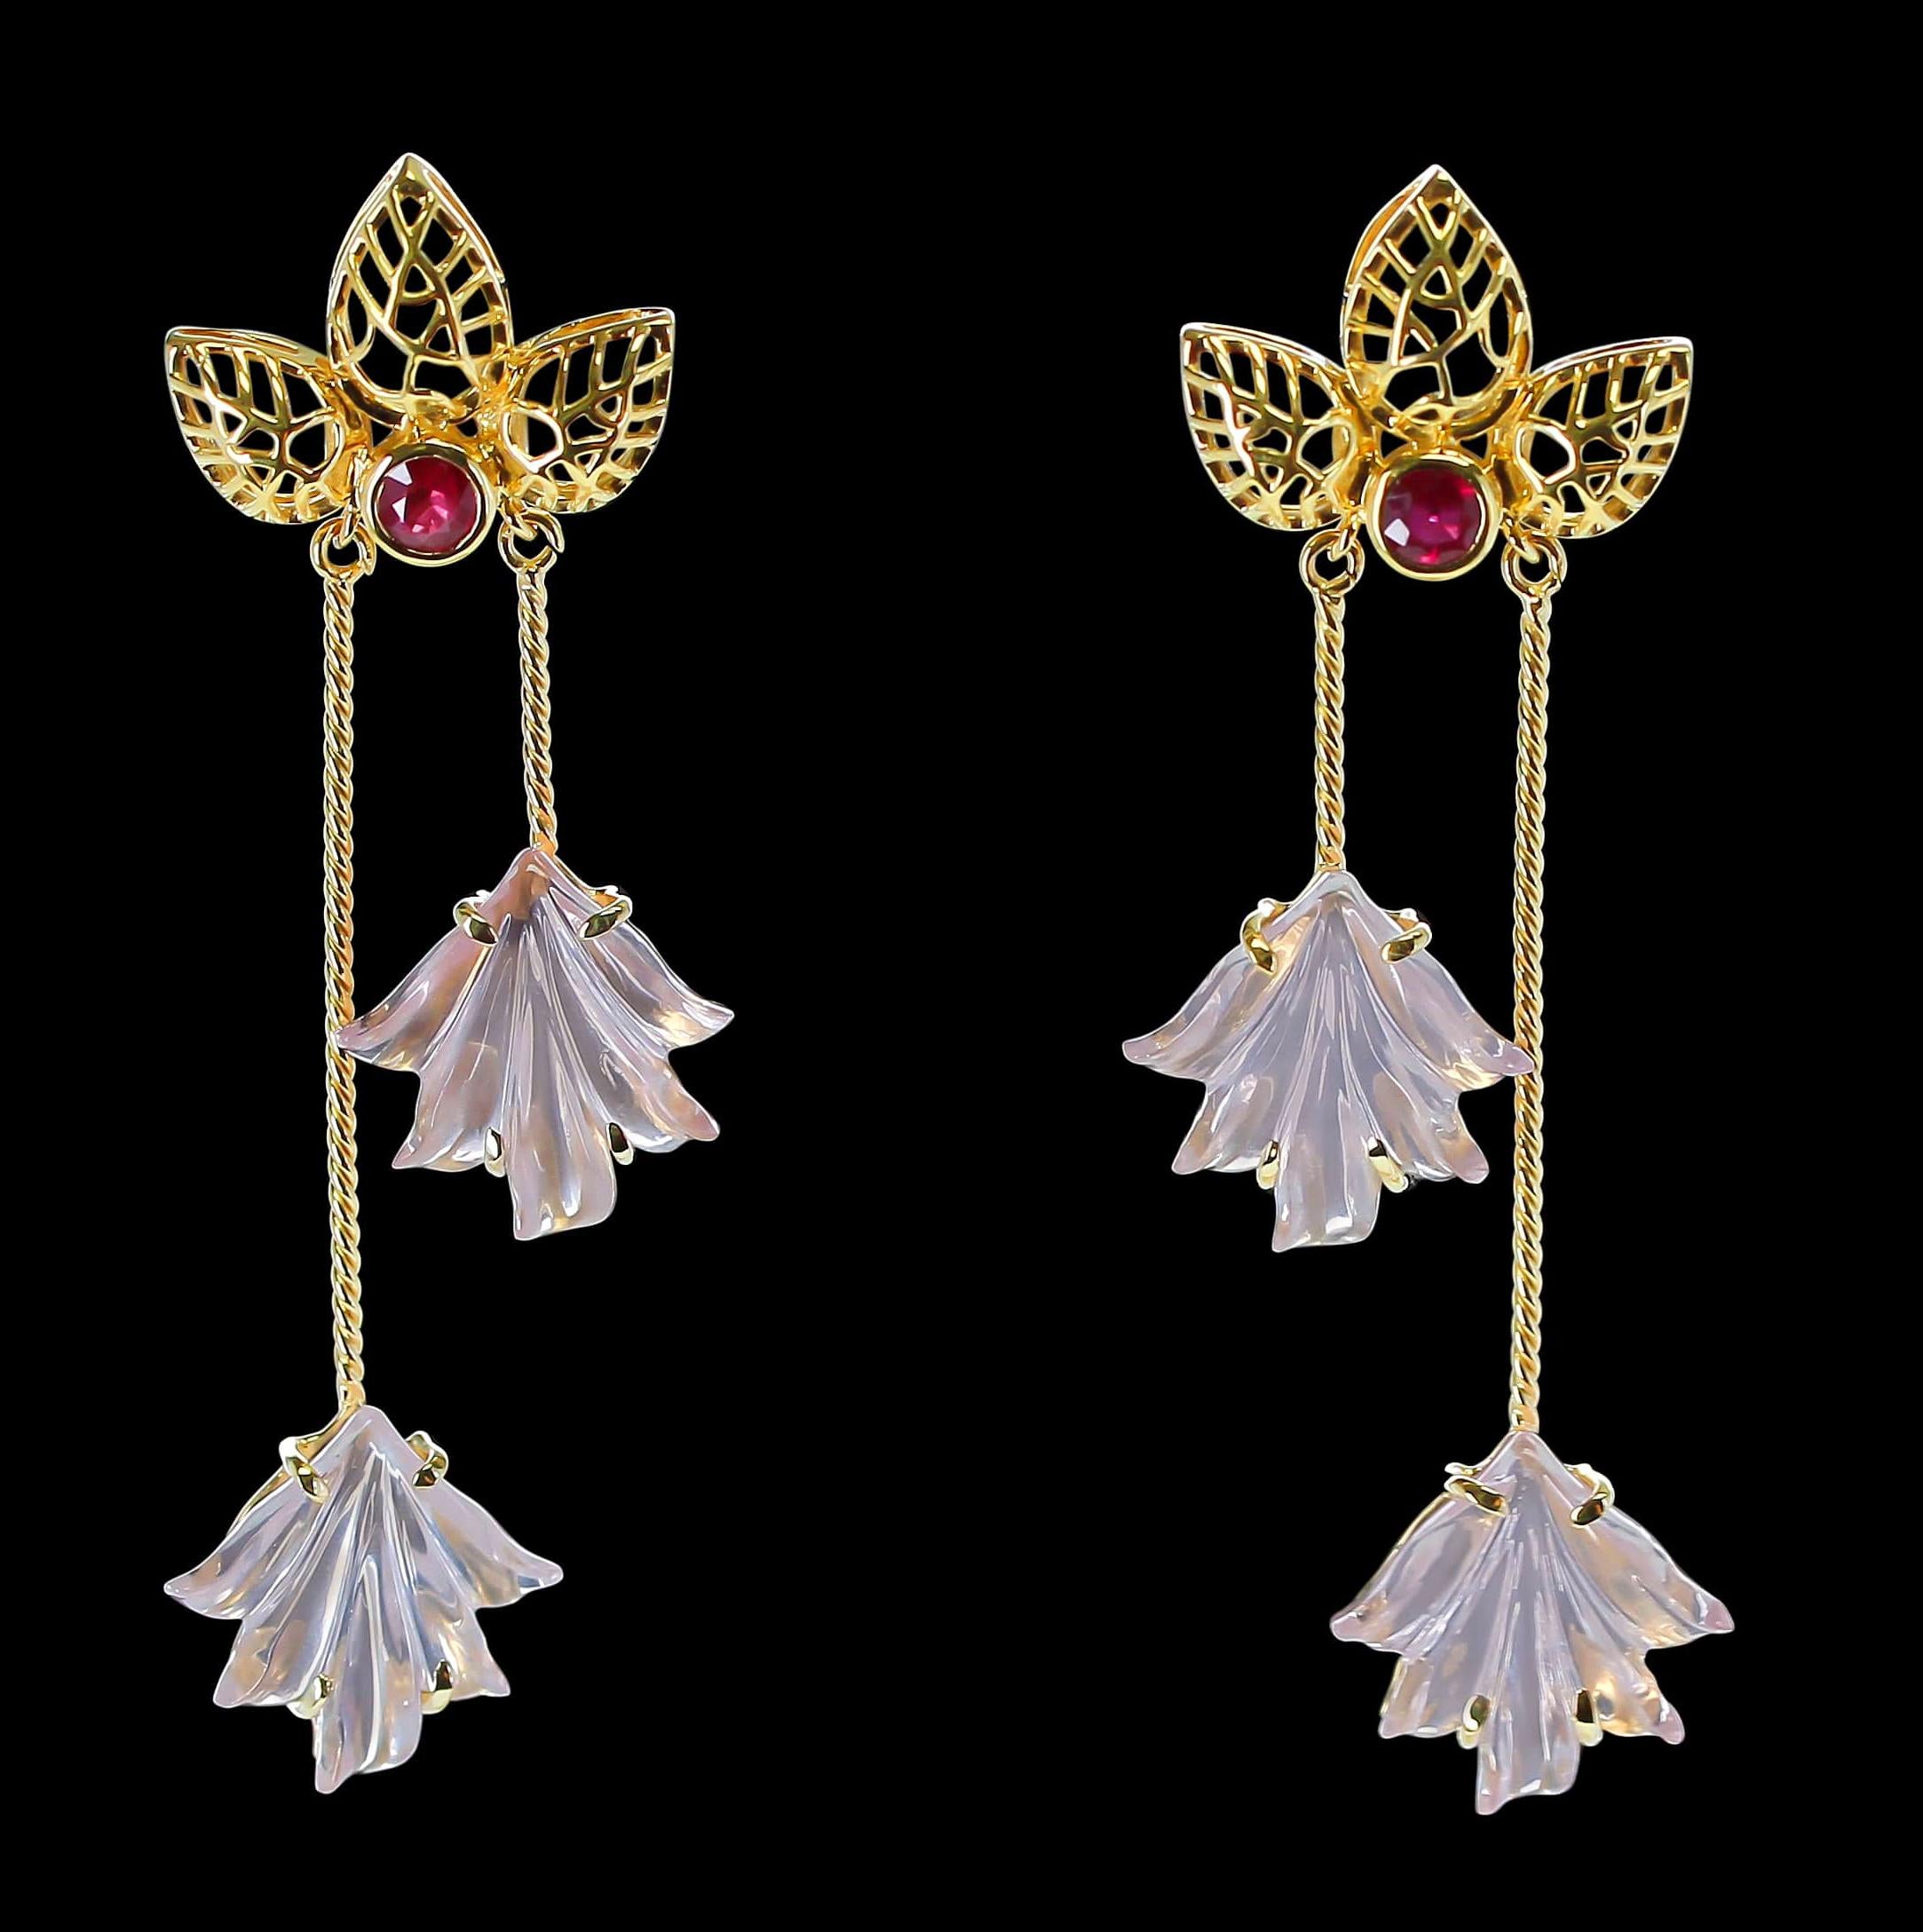 A Dual Carved Pair of Rose Quartz on each earring with intricate Gold Leaf Work on top accented with a ruby cut stone. 14K Gold, Rose Quartz Weight: 16.98 carats, Ruby Weight: 0.52 carats. L: 2 & 3/8” Metal type and stones can be customized. 